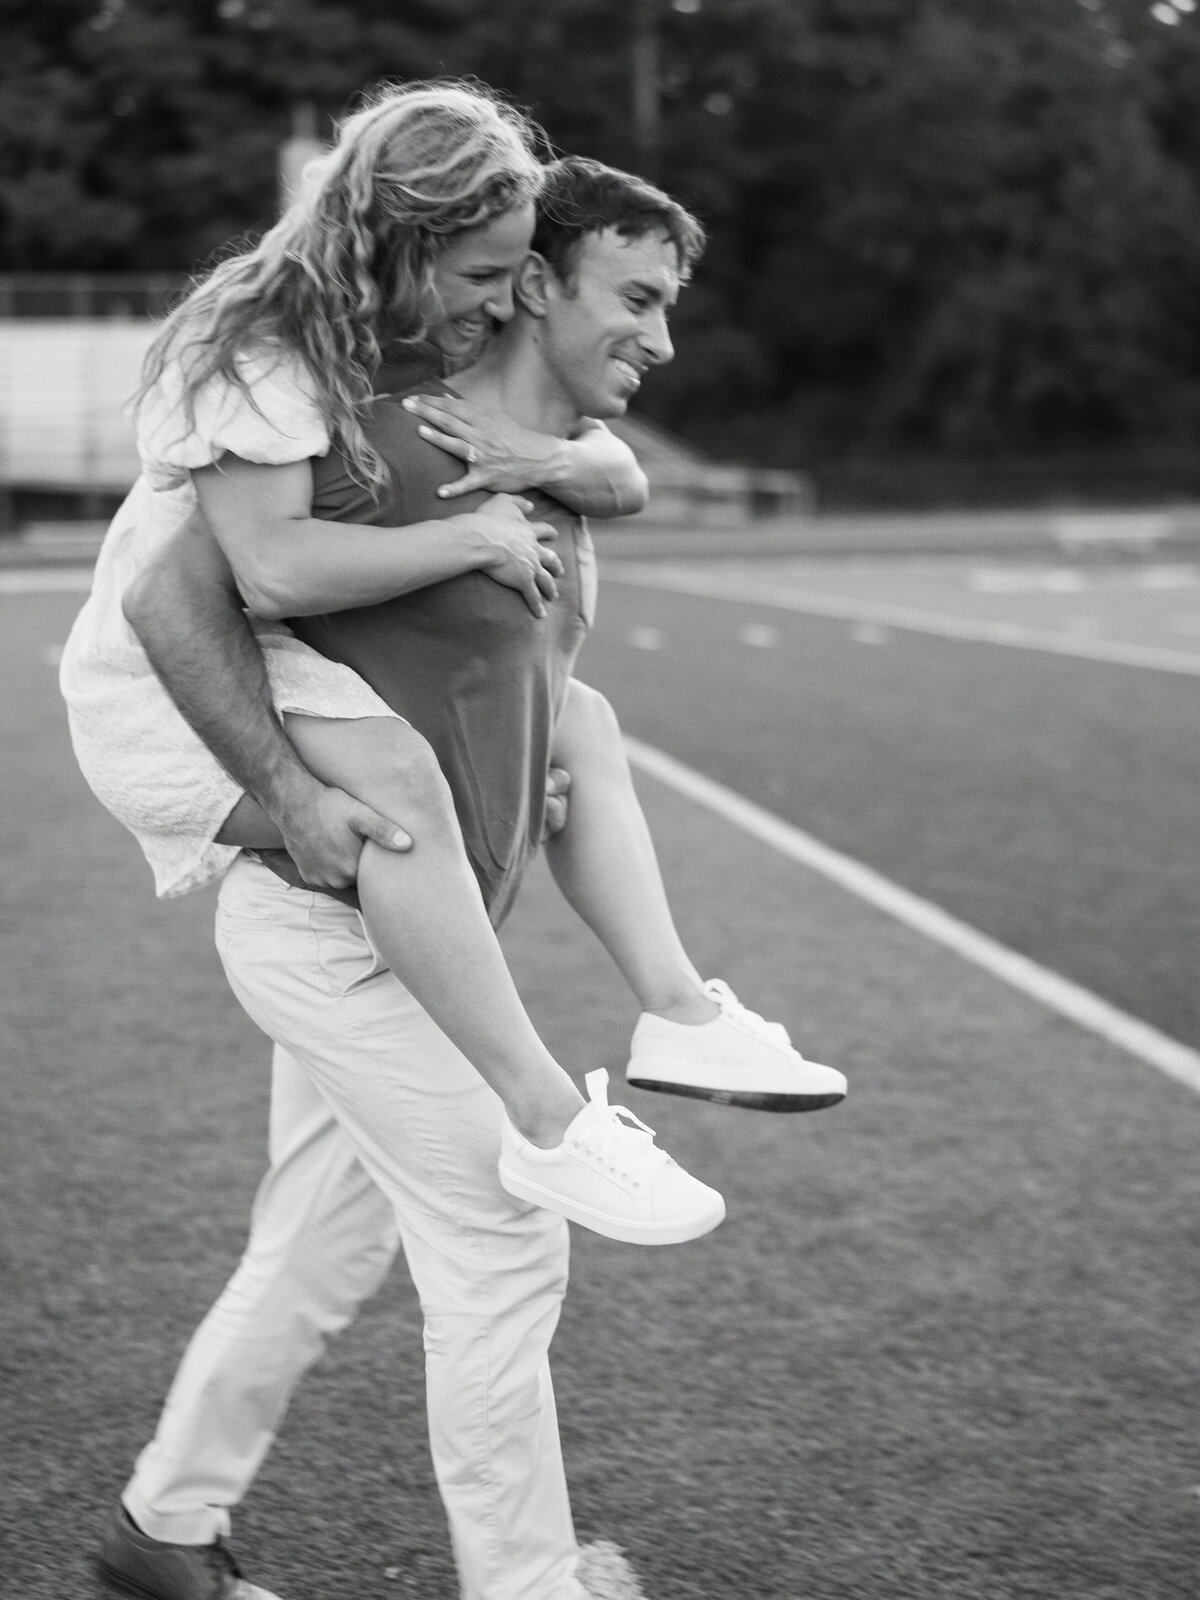 Groom carrying bride on football field photographed by Chicago editorial wedding photographer Arielle Peters